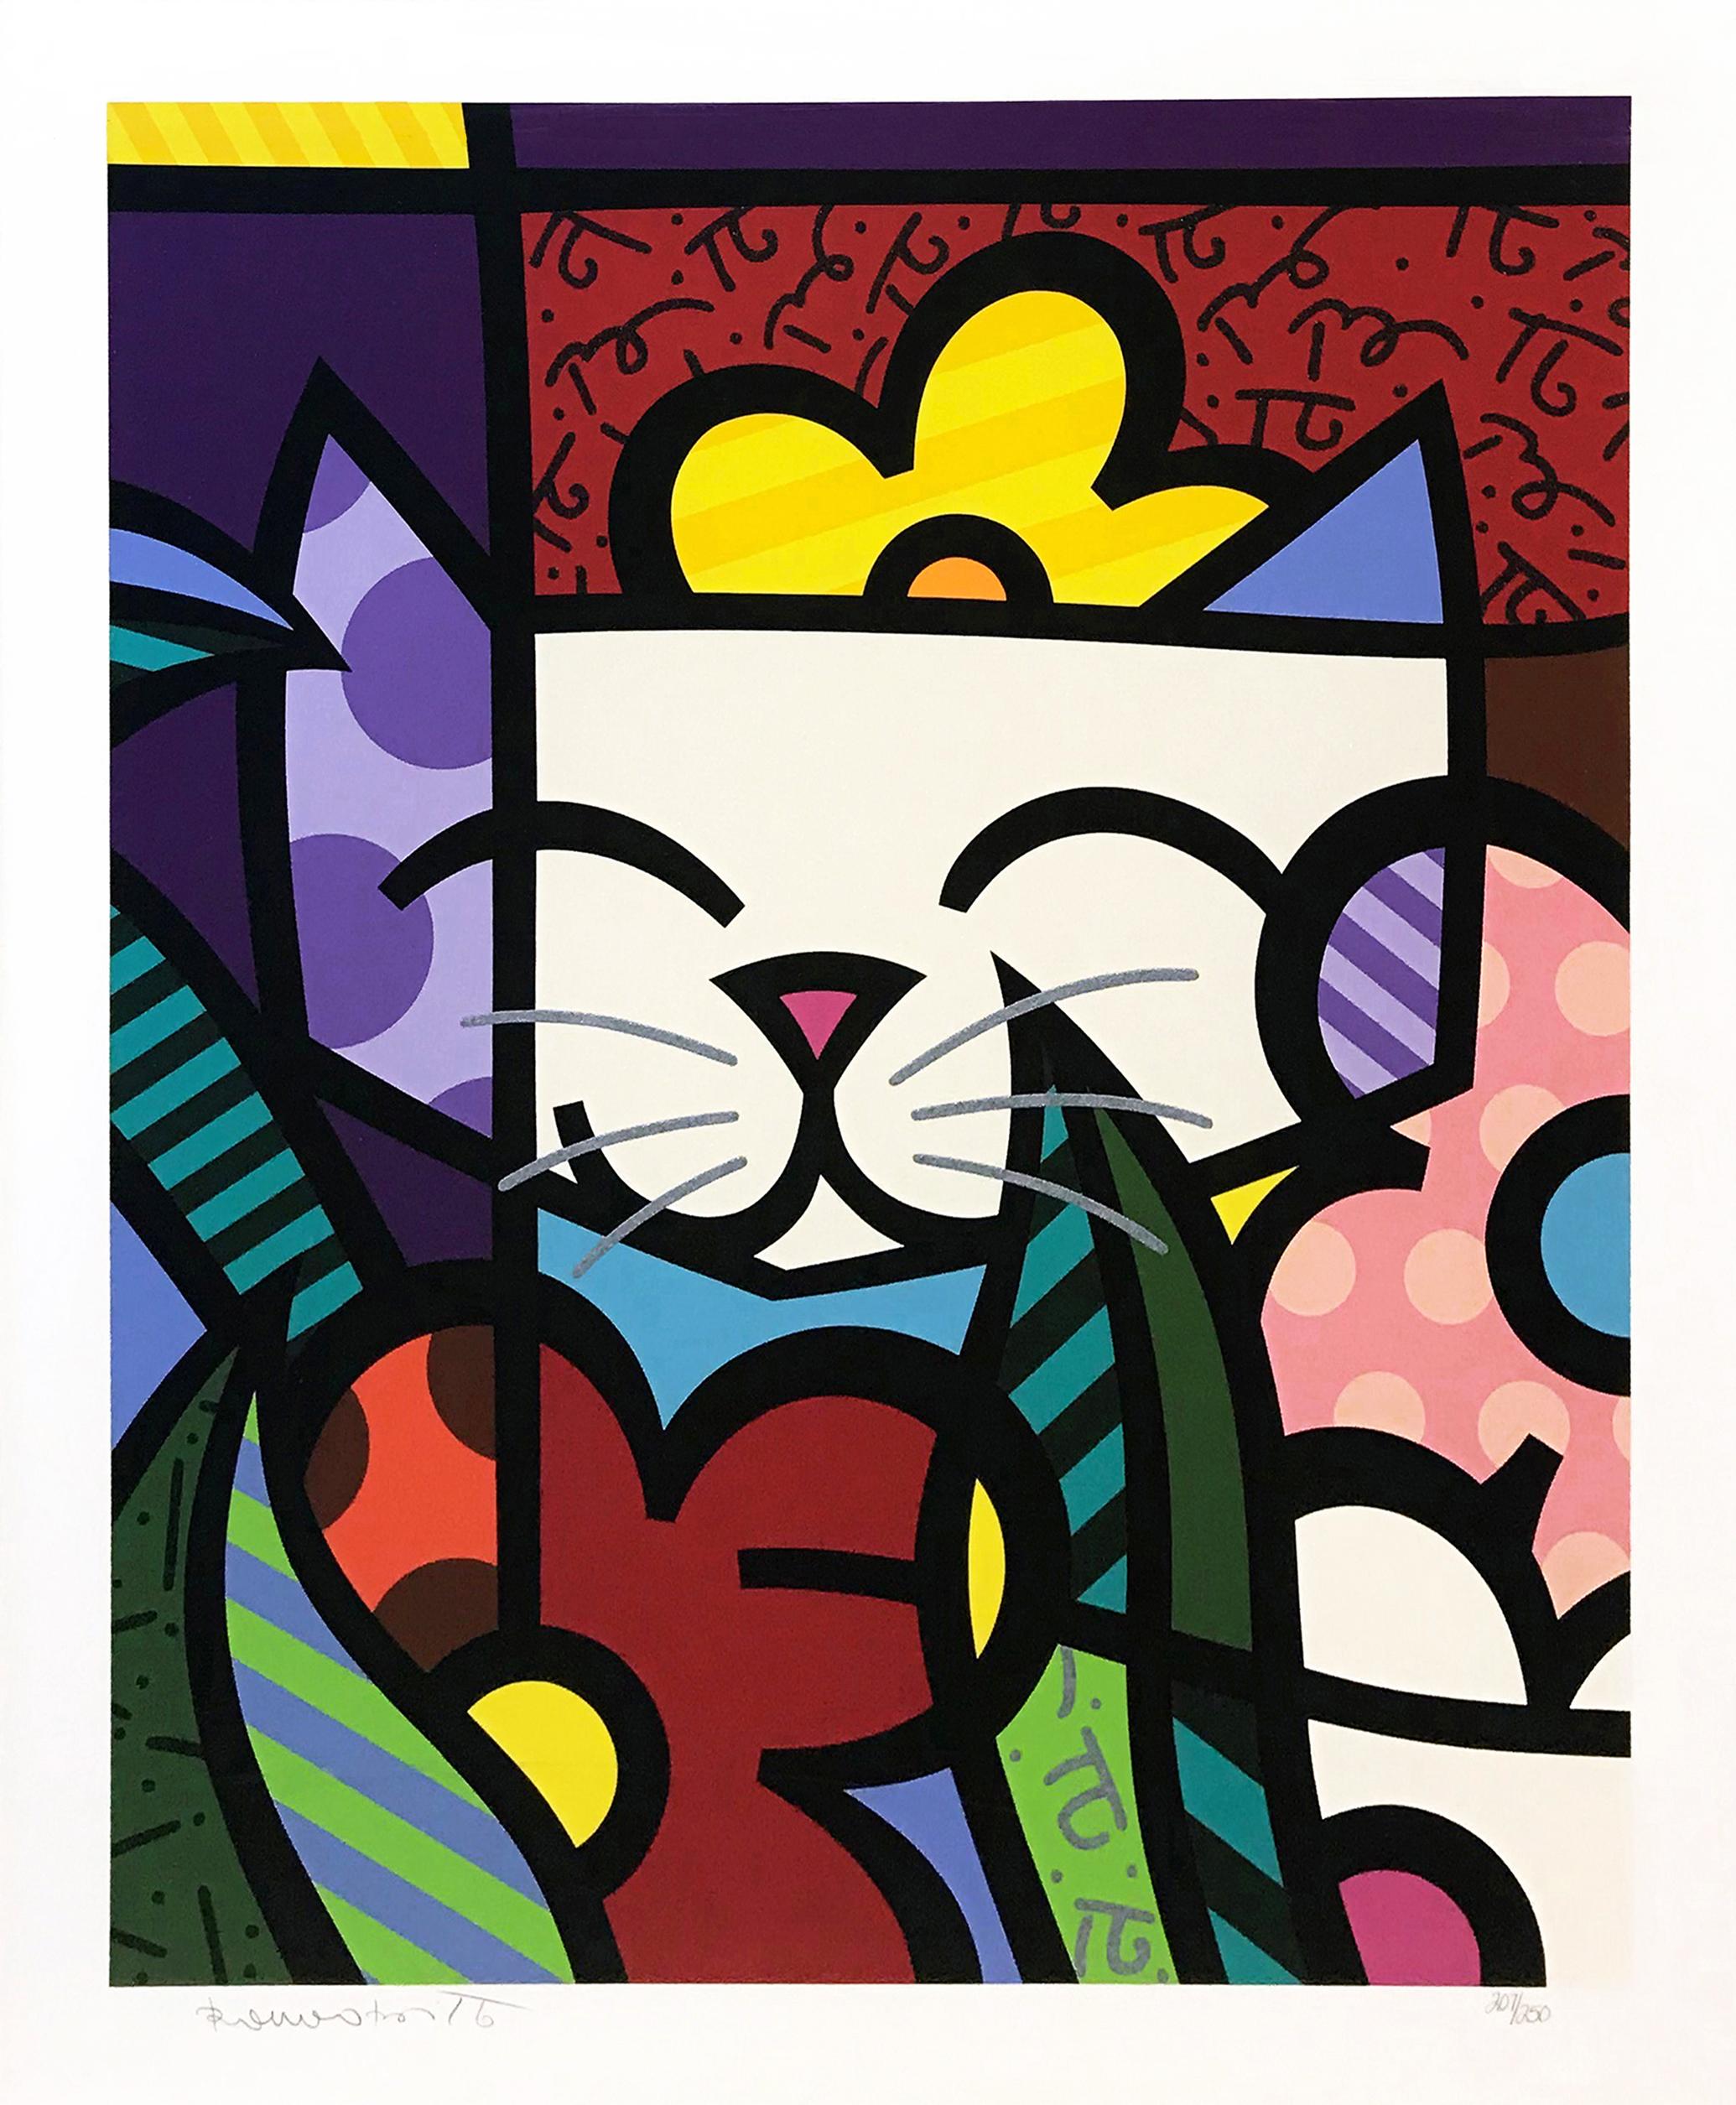 BEHIND THE FLOWERS - Print by Romero Britto